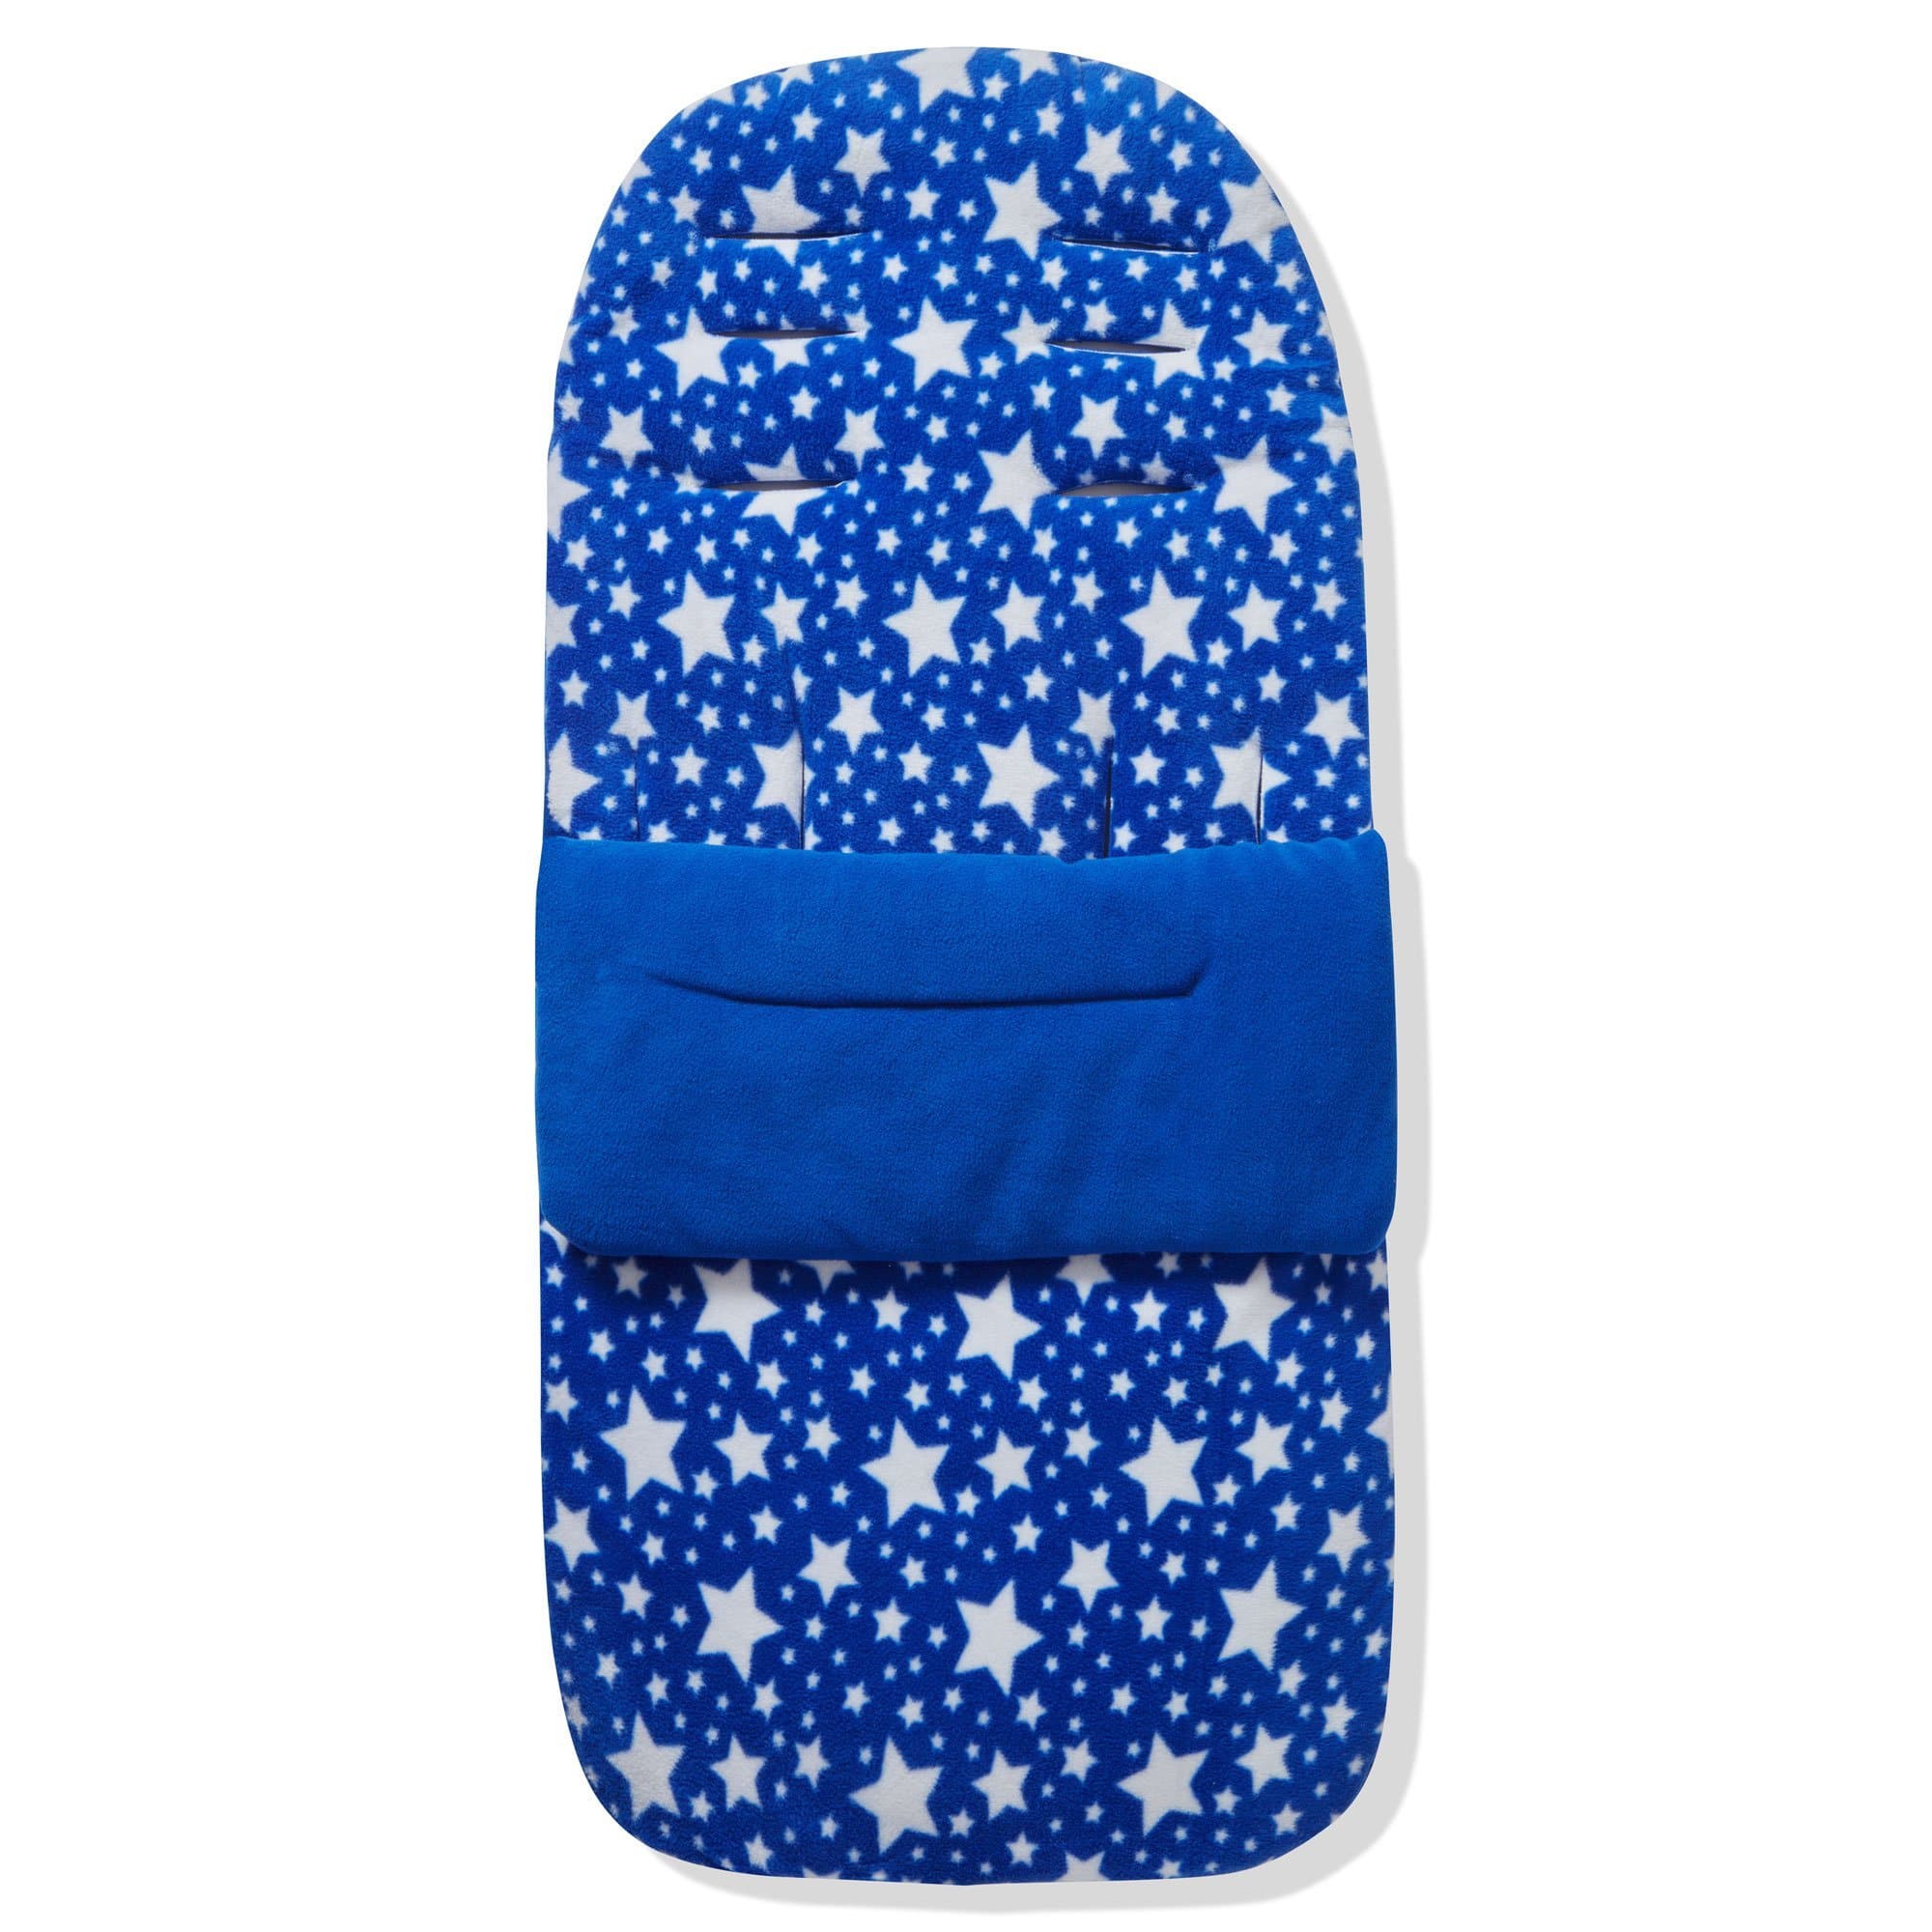 Fleece Footmuff / Cosy Toes Compatible with Emmaljunga - For Your Little One